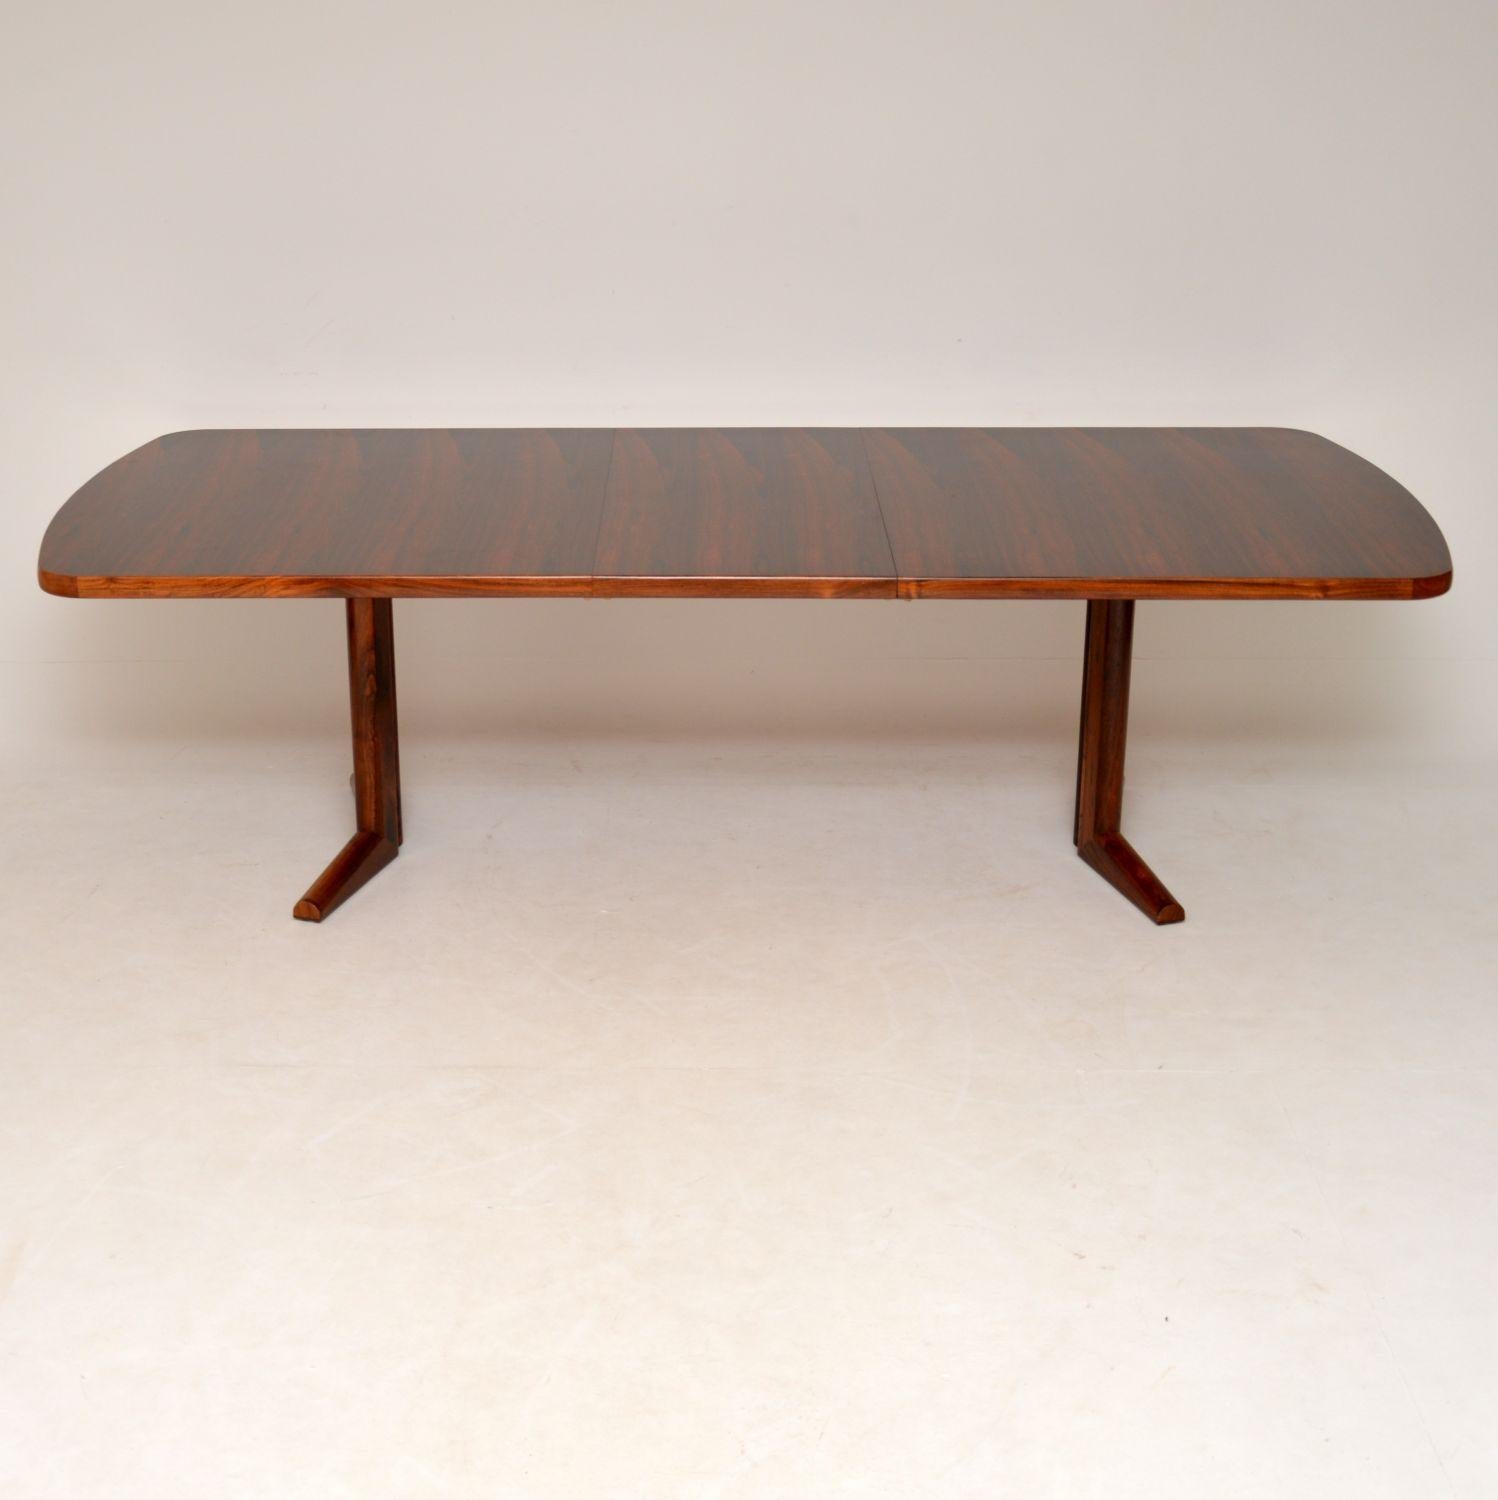 British 1970s Vintage Wooden Extending Dining Table by Gordon Russell